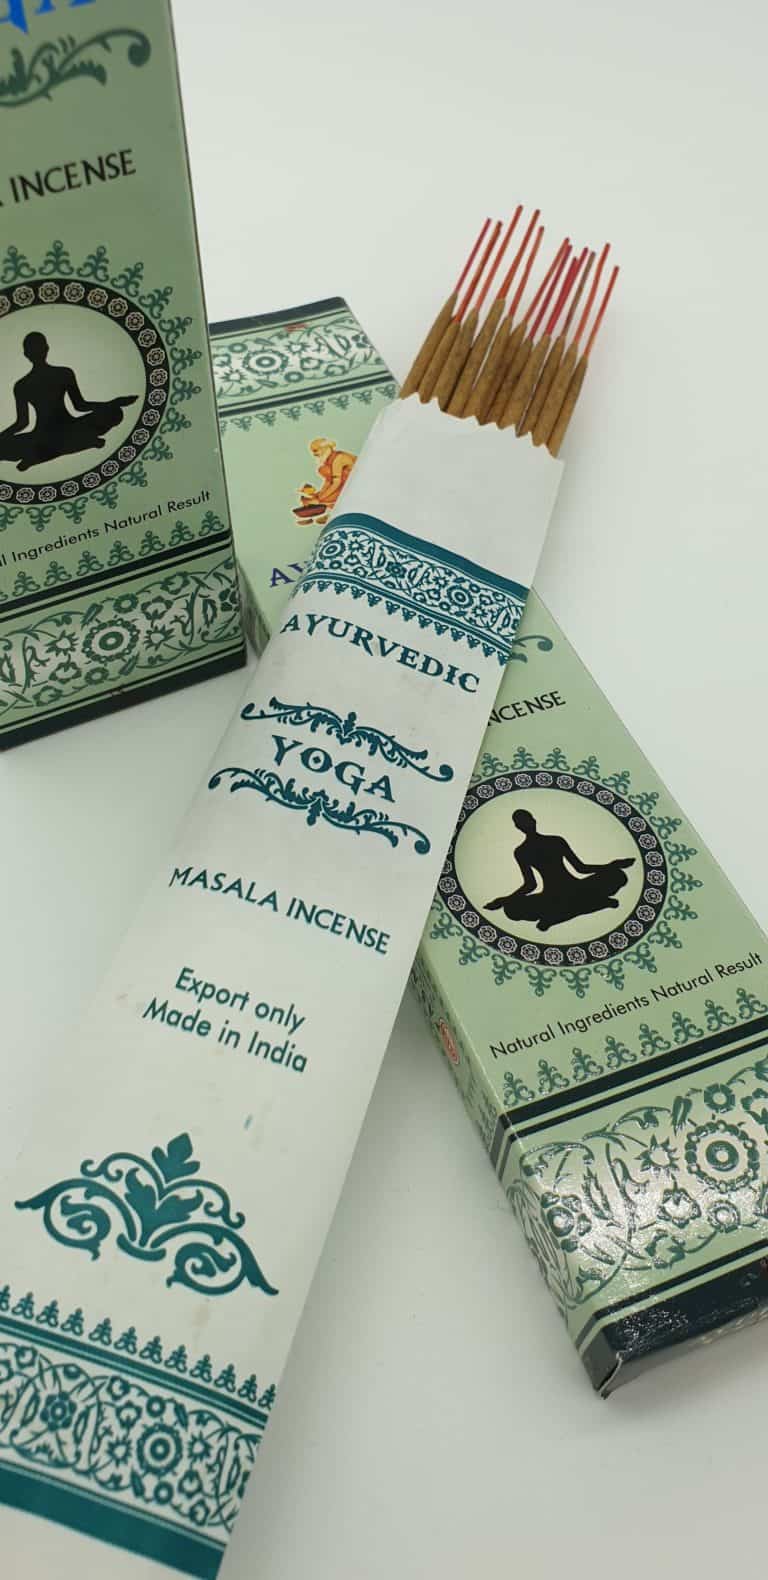 Ayurvedic incense blended for yoga. 100% natural, hand rolled. A long blue and turquoise box with an inner paper sleeve. 15 sticks. Close up of patterned sleeve.